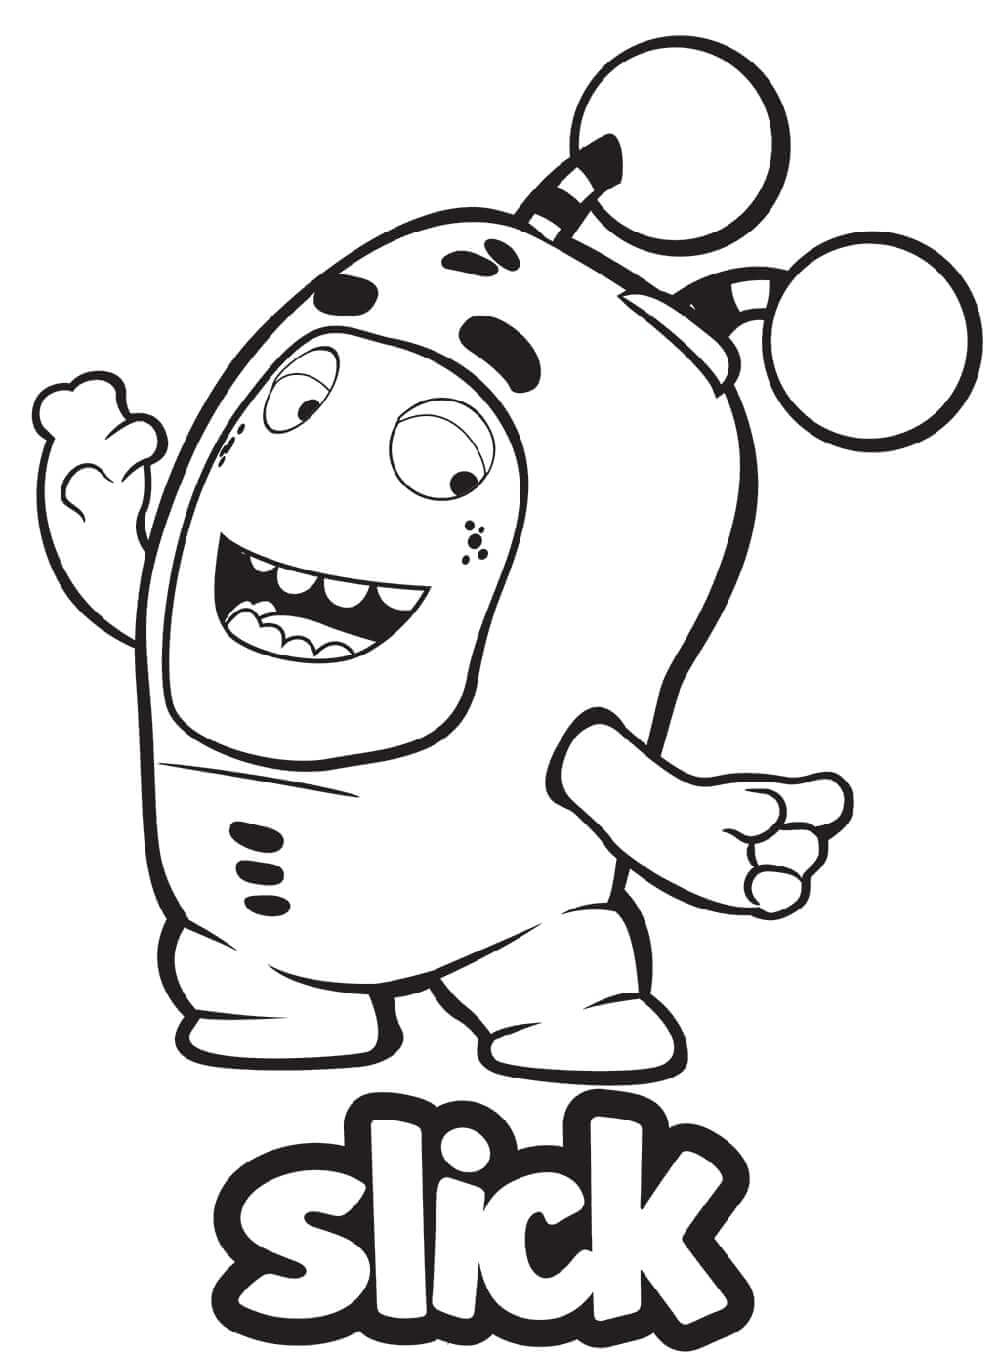 Fuse Oddbods Coloring Page - Free Printable Coloring Pages for Kids